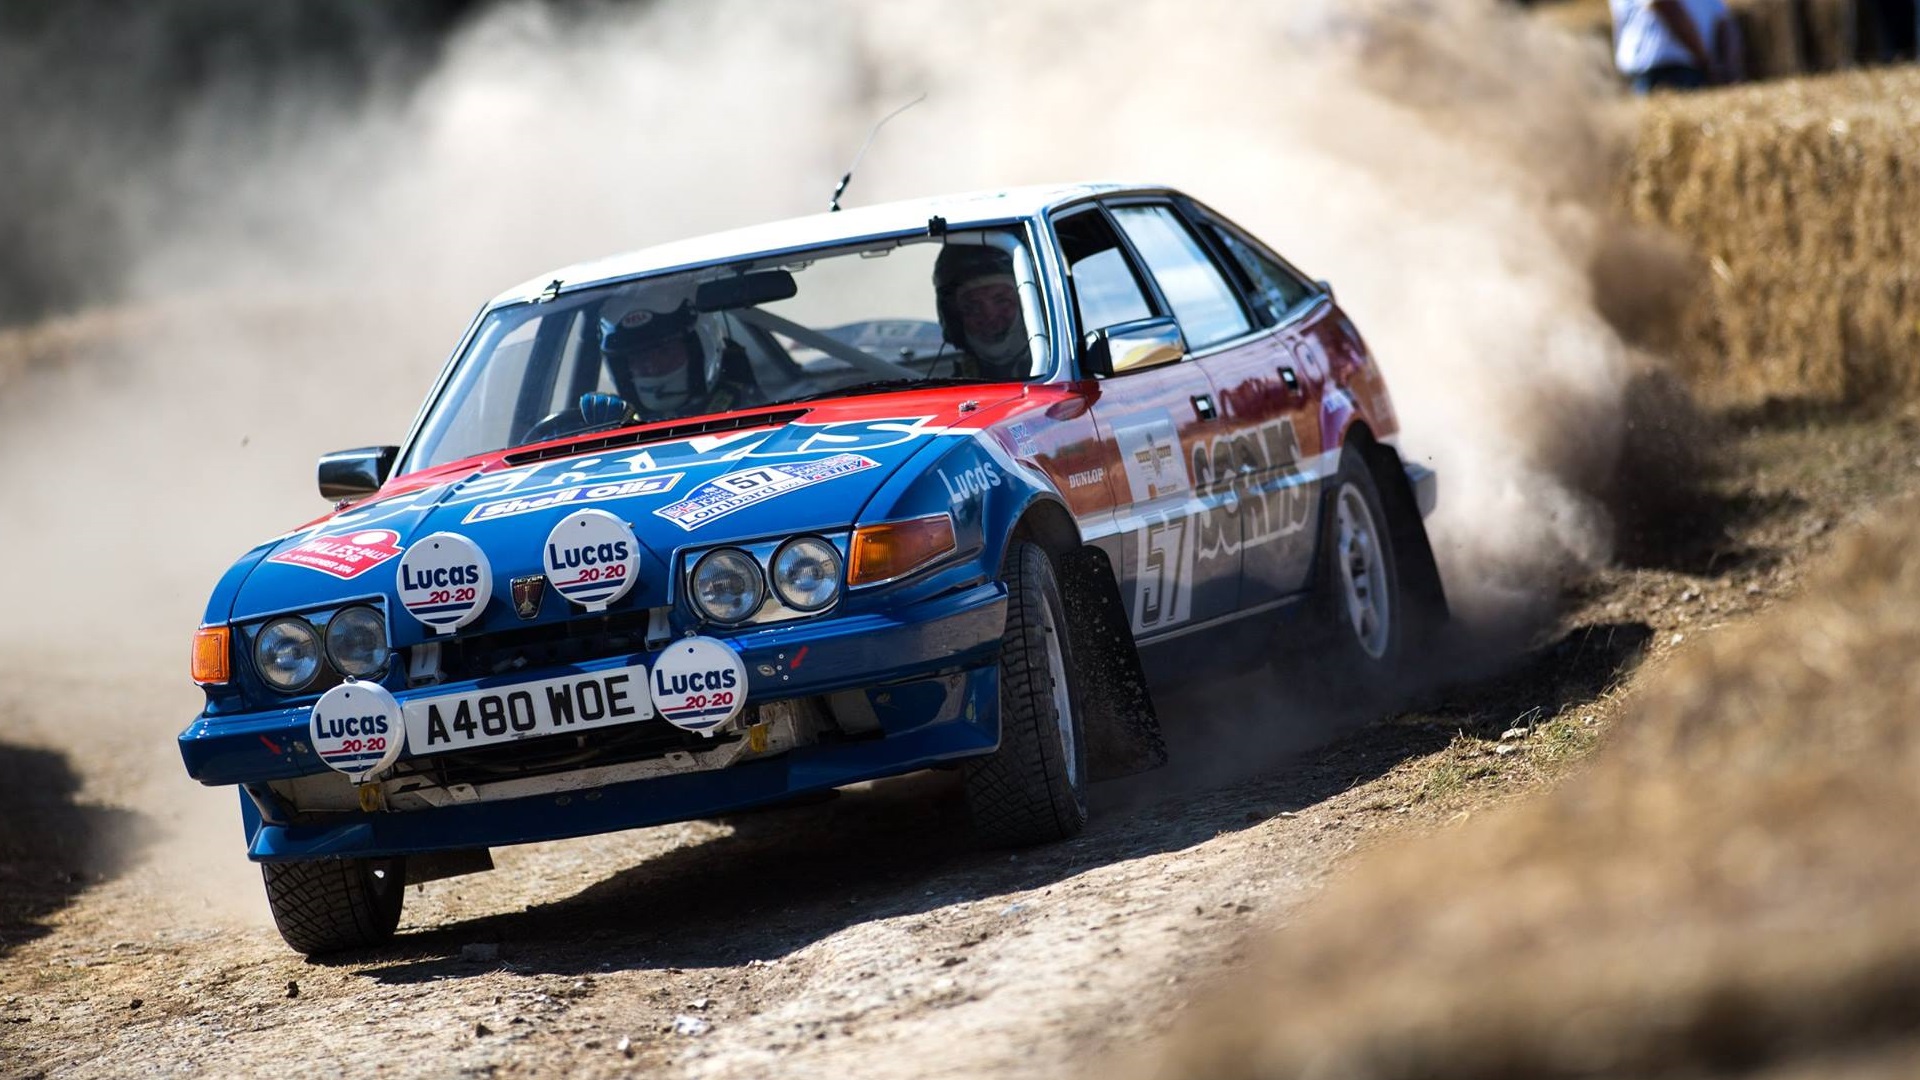 General 1920x1080 Rover Rally race cars British cars dust car numbers racing vehicle livery